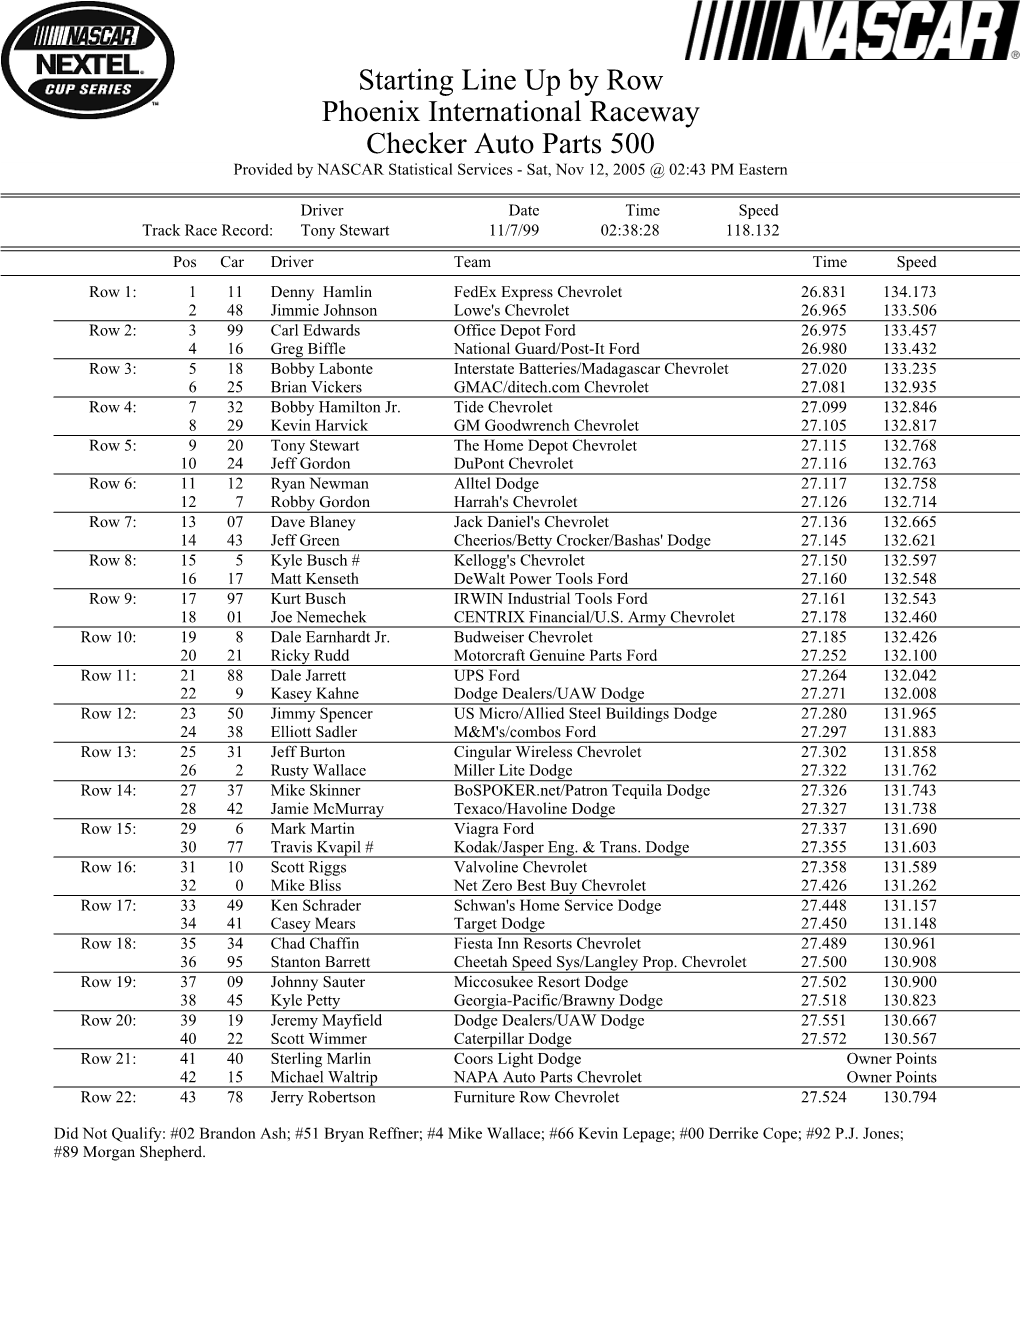 Starting Line up by Row Phoenix International Raceway Checker Auto Parts 500 Provided by NASCAR Statistical Services - Sat, Nov 12, 2005 @ 02:43 PM Eastern